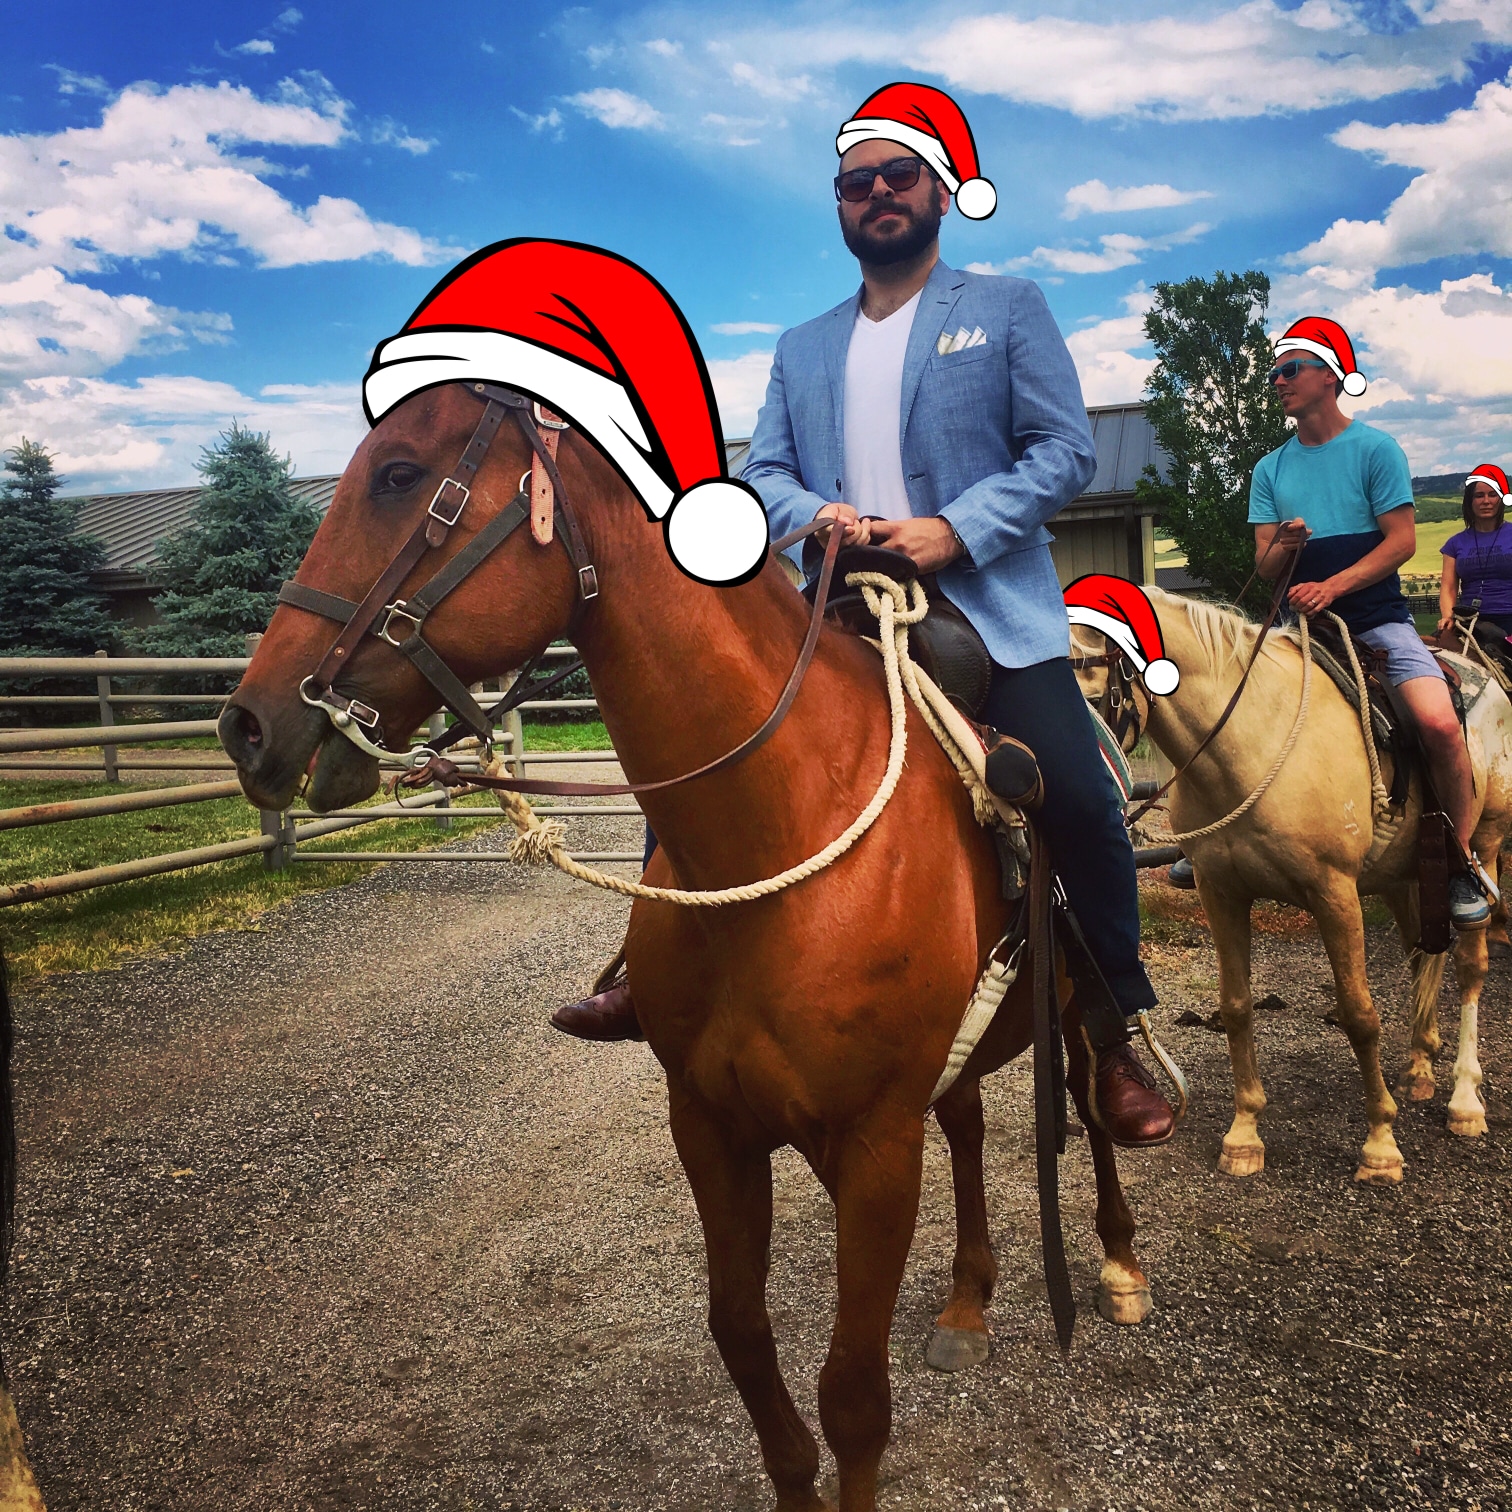 A photo of me wearing a blue blazer and pocket square while on a horse, looking quite dapper. Both me and the horse are wearing Santa hats.